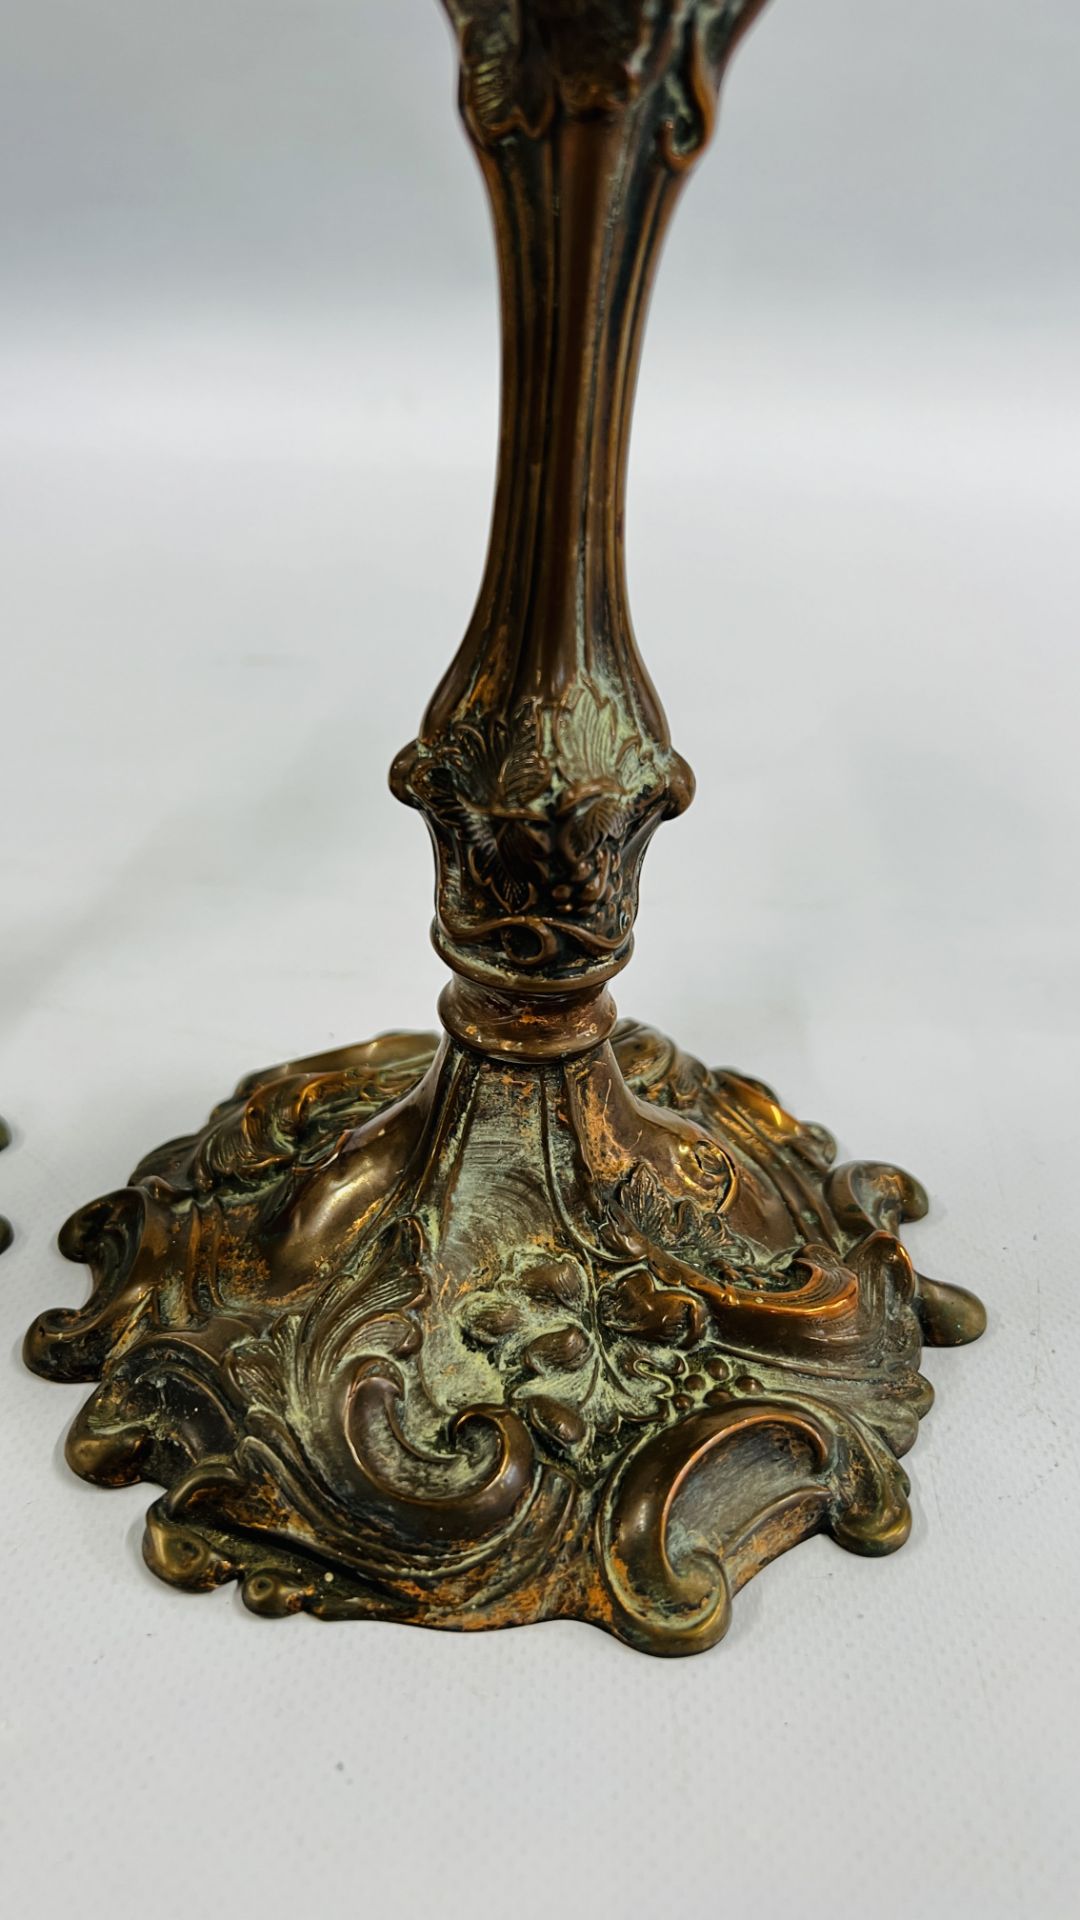 A PAIR OF ORNATE C19TH COPPER CANDLESTICKS WITH DETACHABLE SCONCES - HEIGHT 27CM. - Image 13 of 20